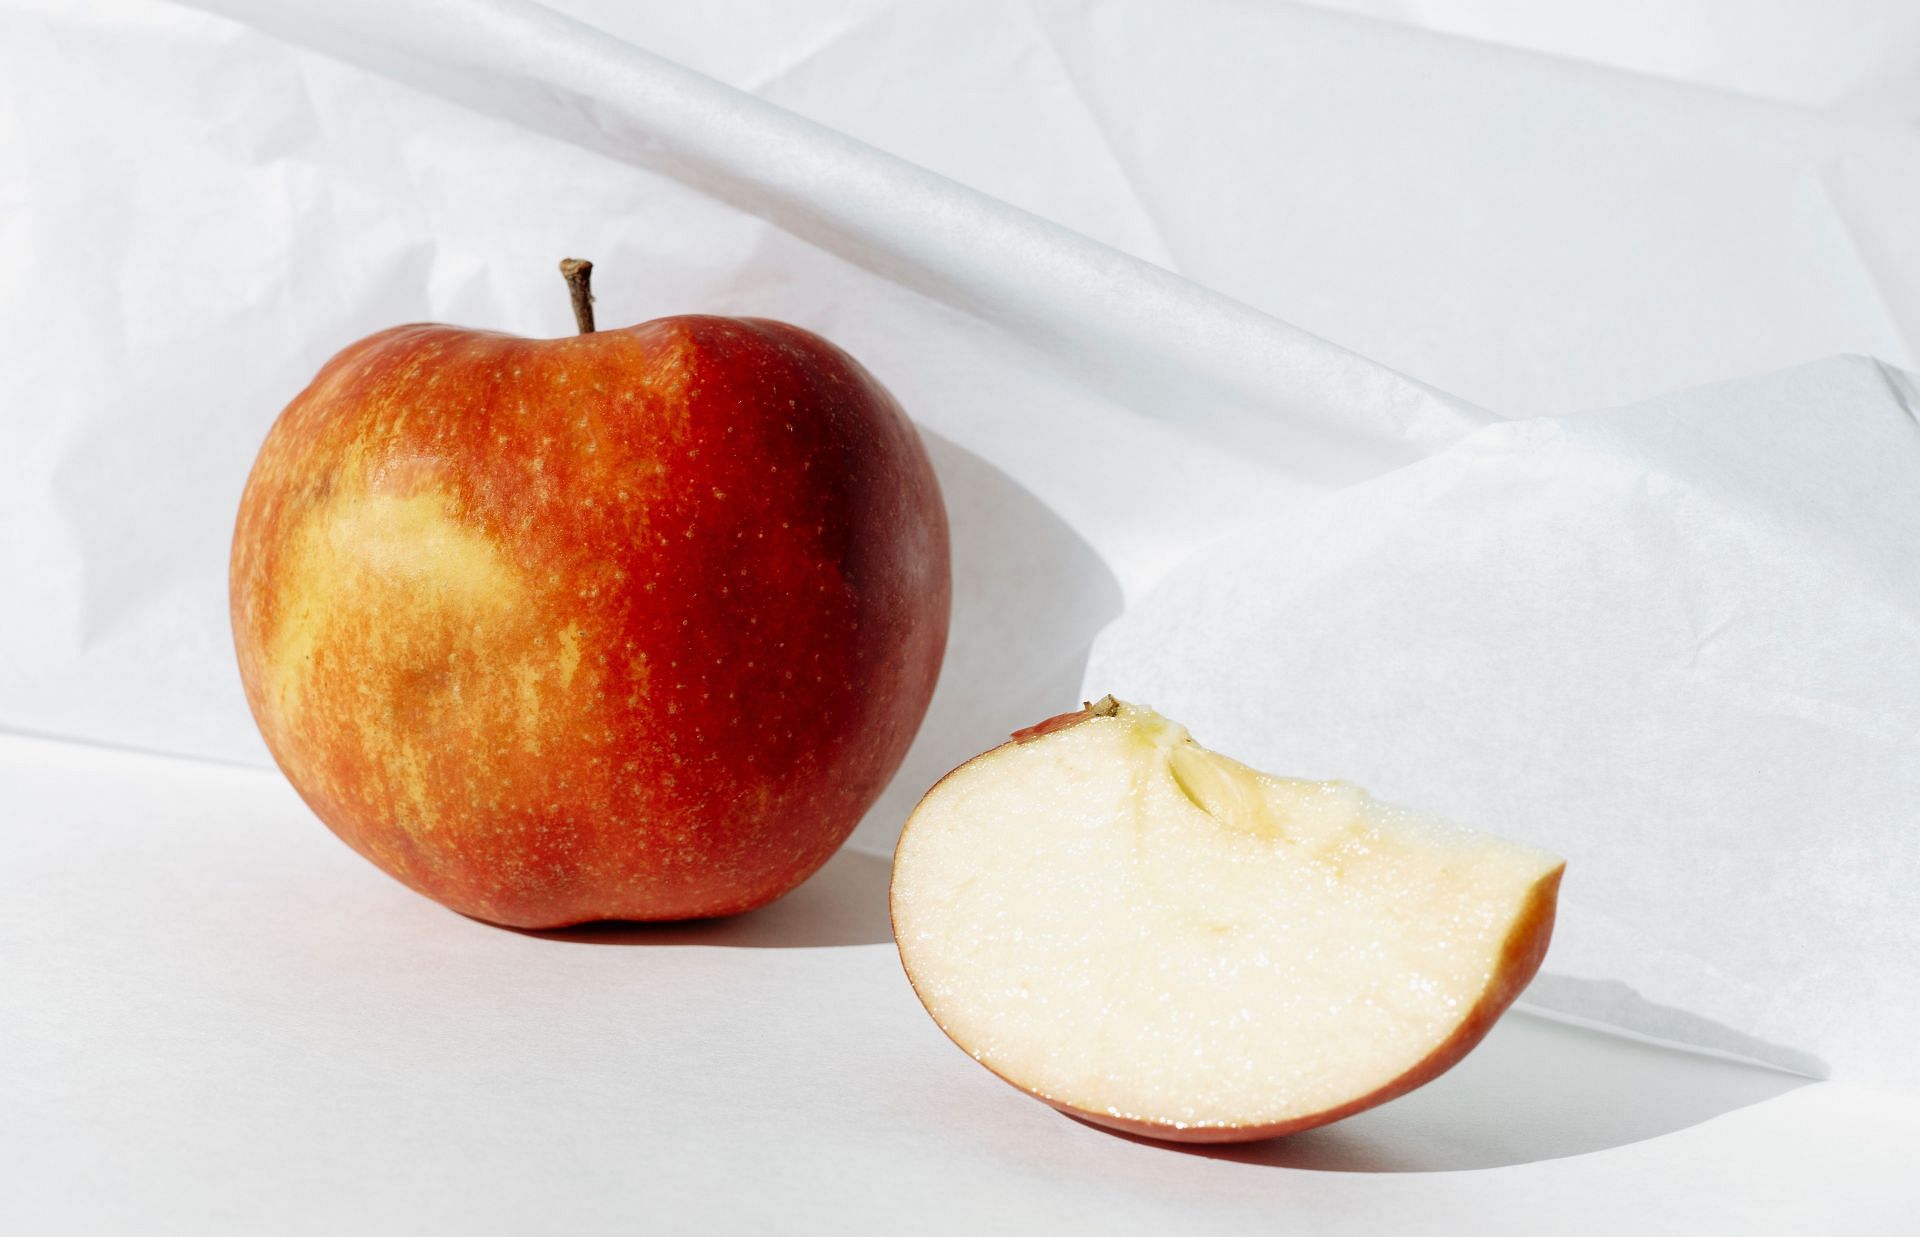 Home remedies for gout- Eating apples is helpful. (Image via Pexels/ Anna Nekrashevich))